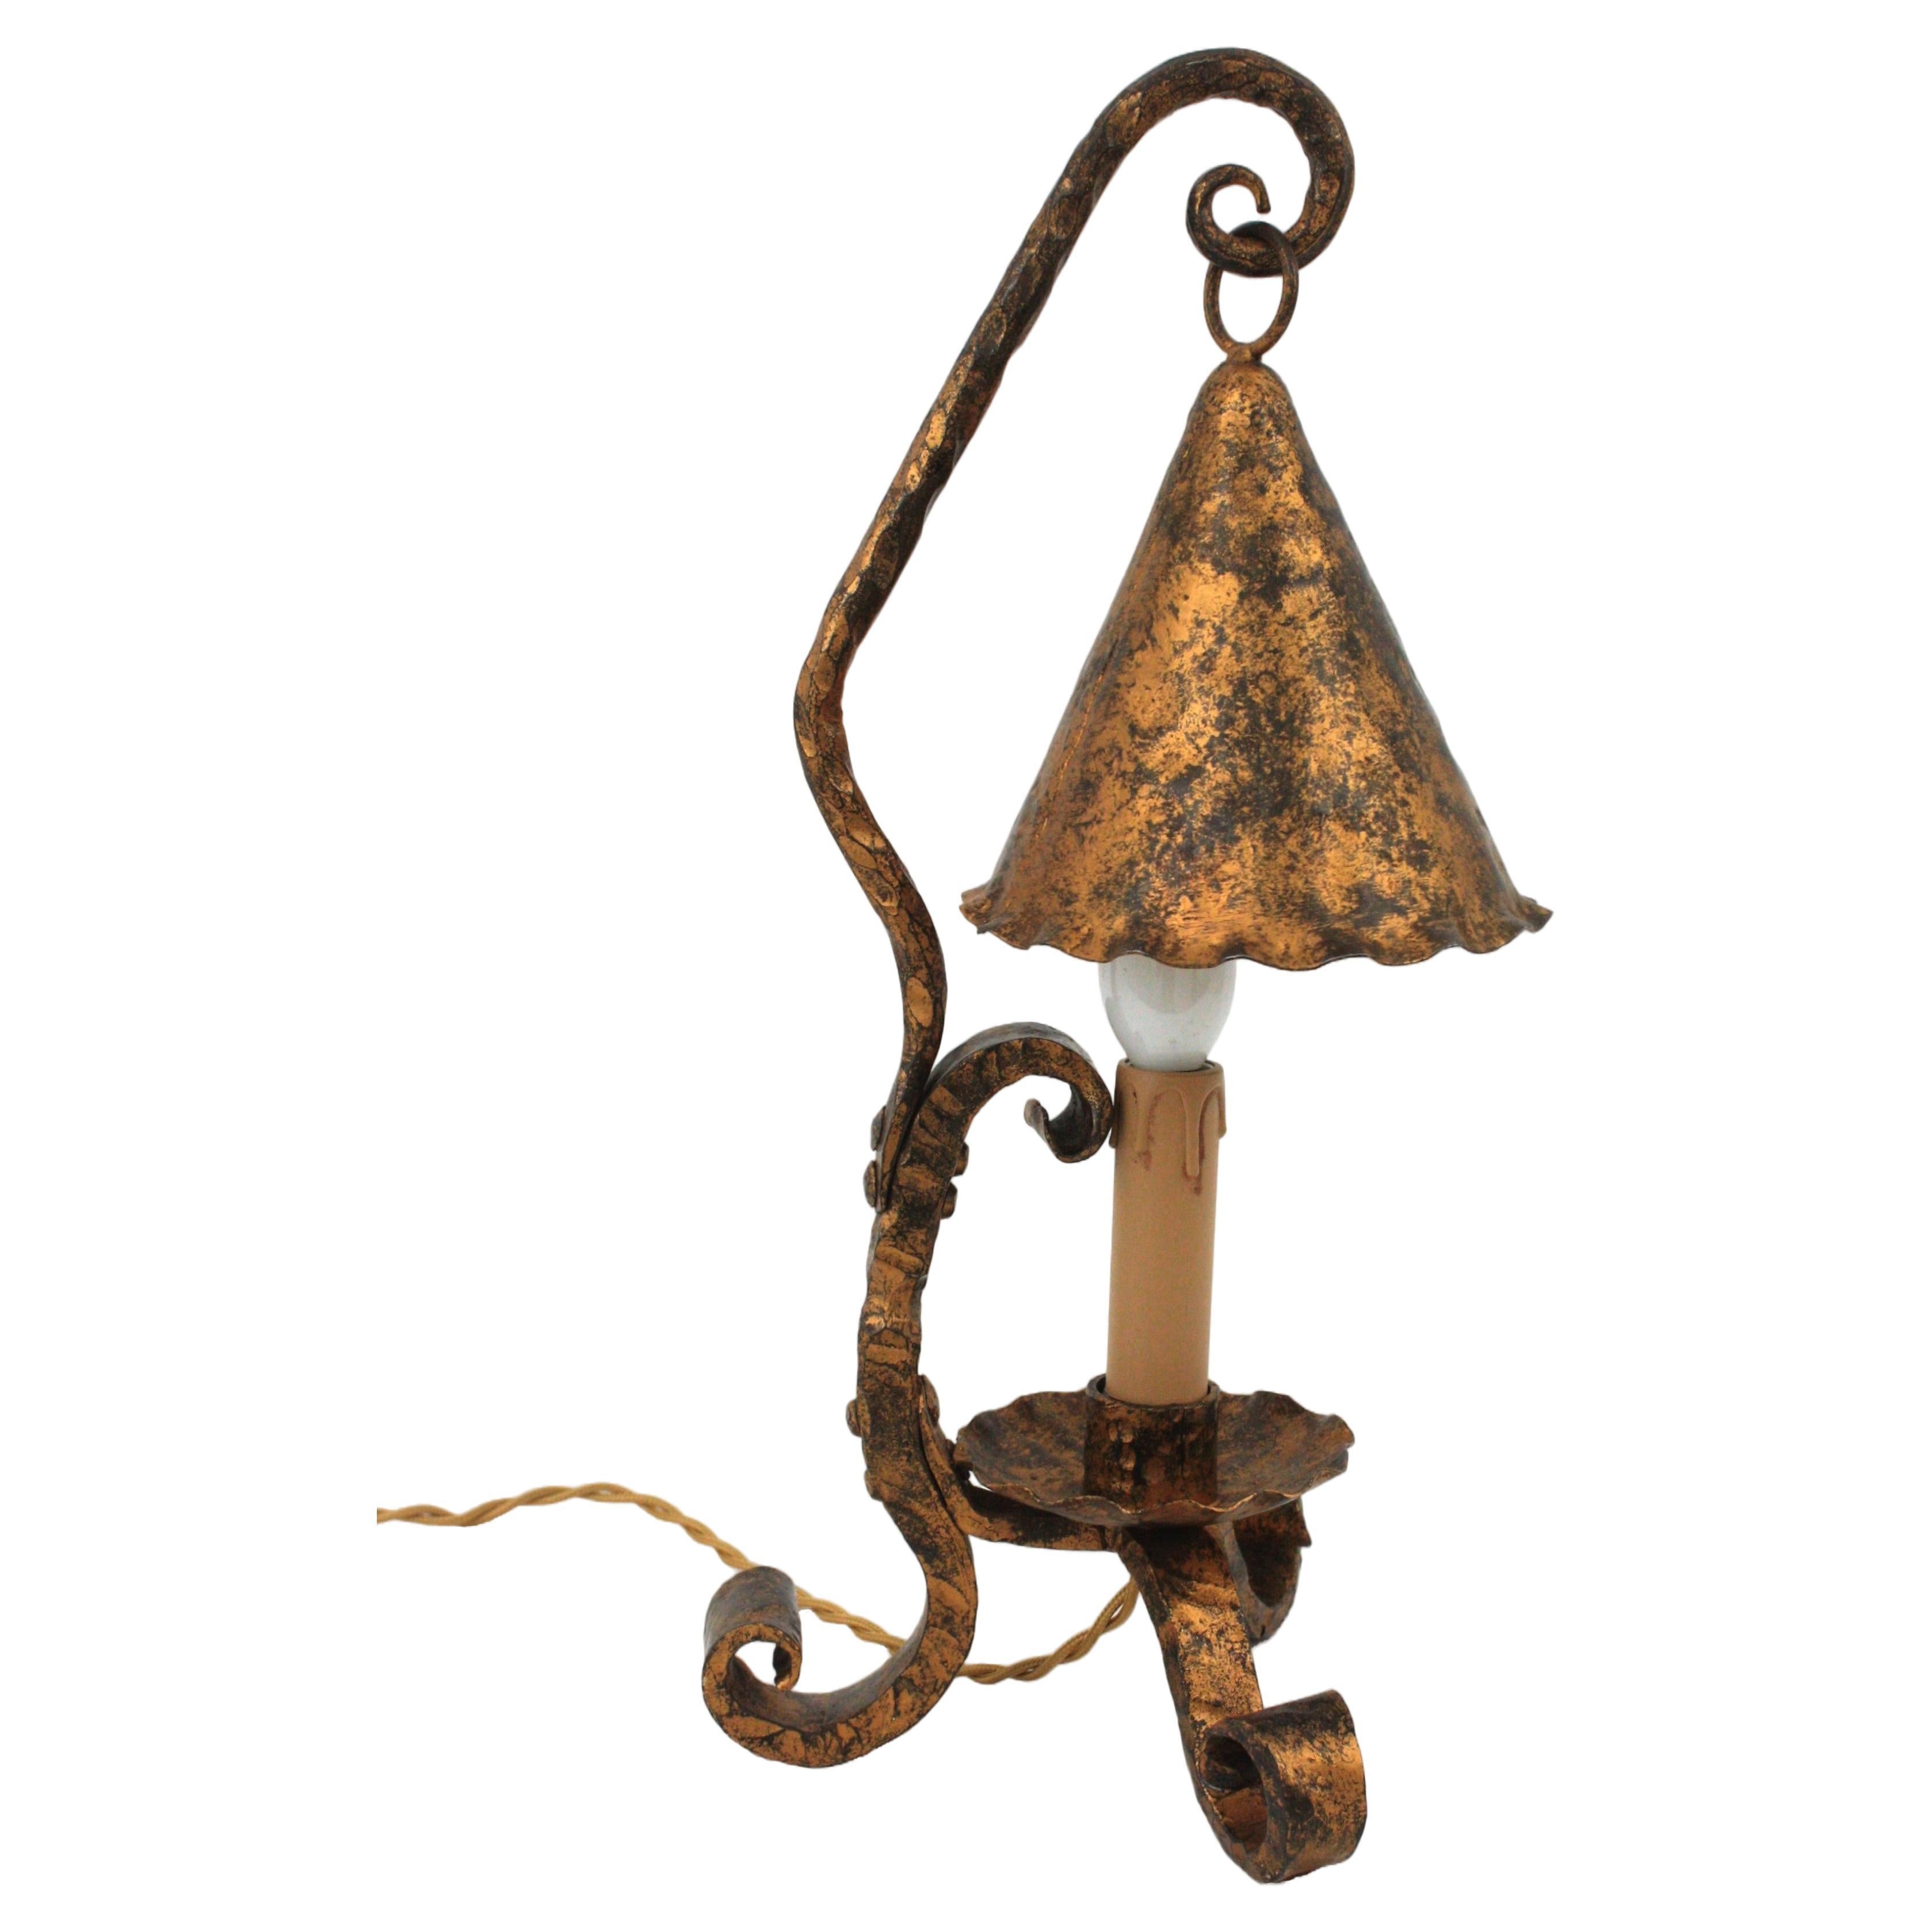 Medieval Style Iron Table Lamp, Spain, 1940s
Gorgeous Spanish Colonial table lamp hand forged in iron with gilt patinated finsih.
Tripod standing piece with scroll work ending feet. Its design inspired in candle lights features a conical iron